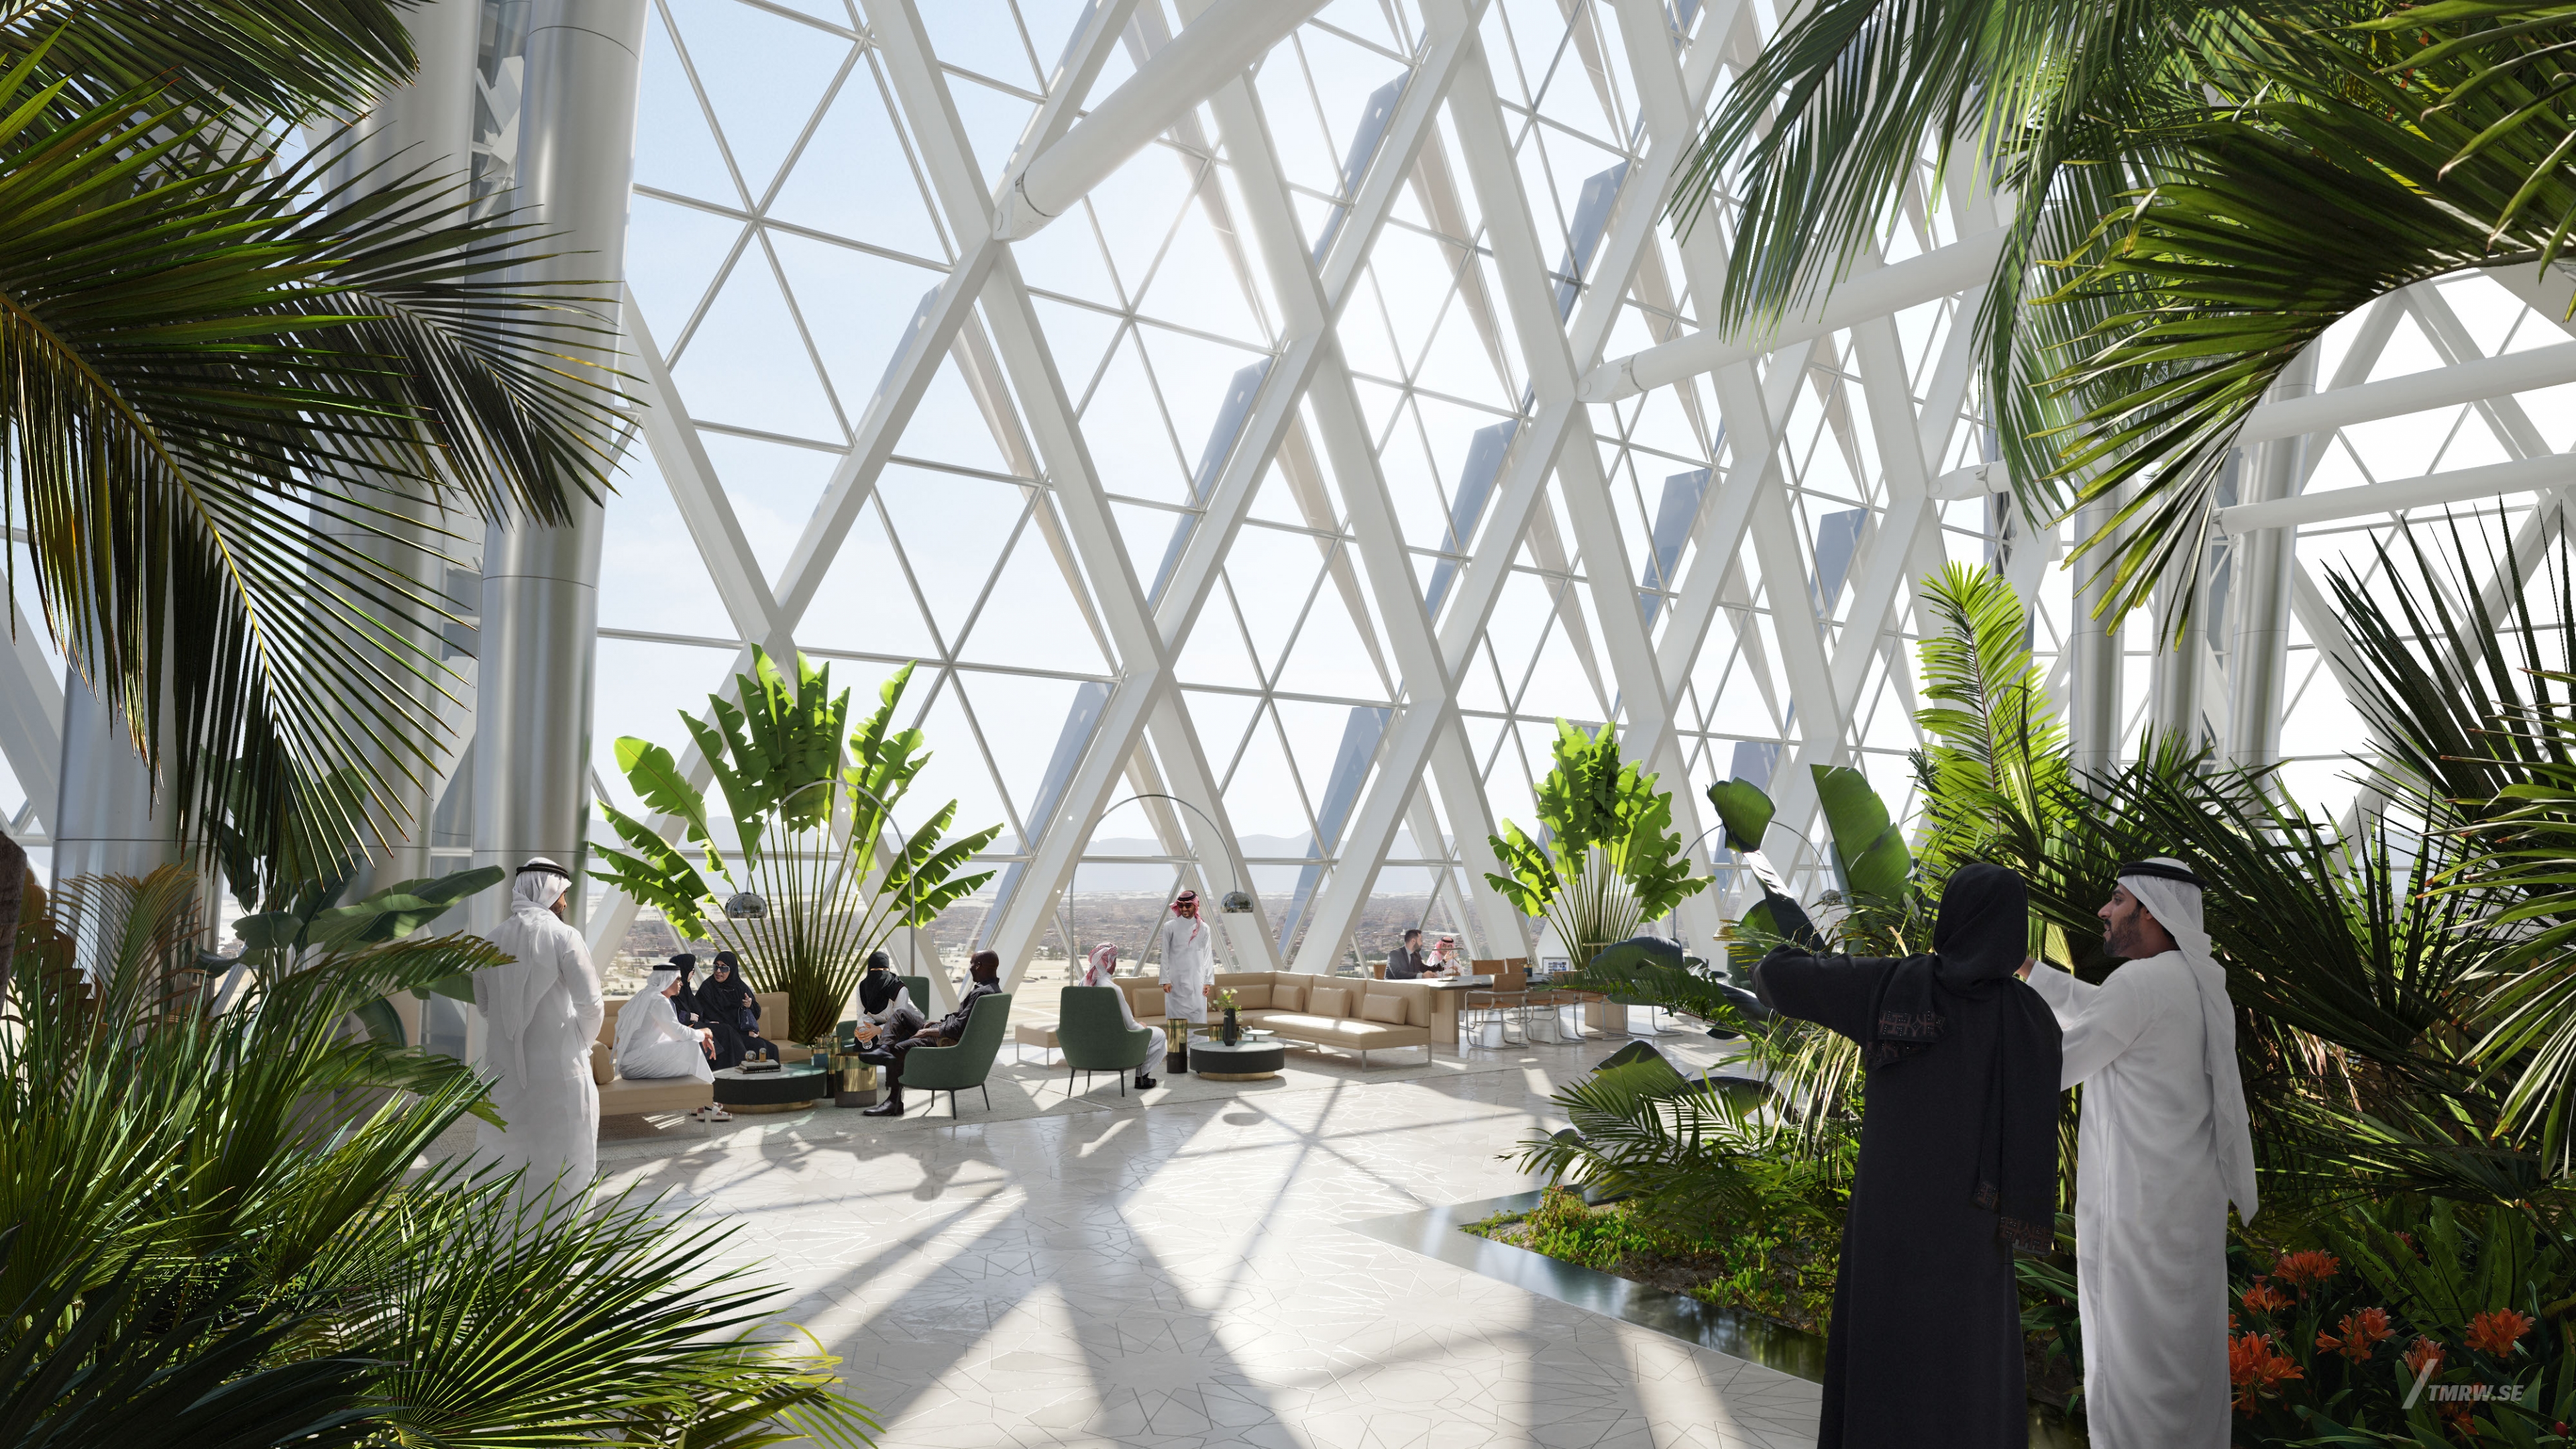 Architectural visualization of Jeddah for HOK. An image of the interior of a office building with decorated with a lot of plants. People talking and walking around in daylight.